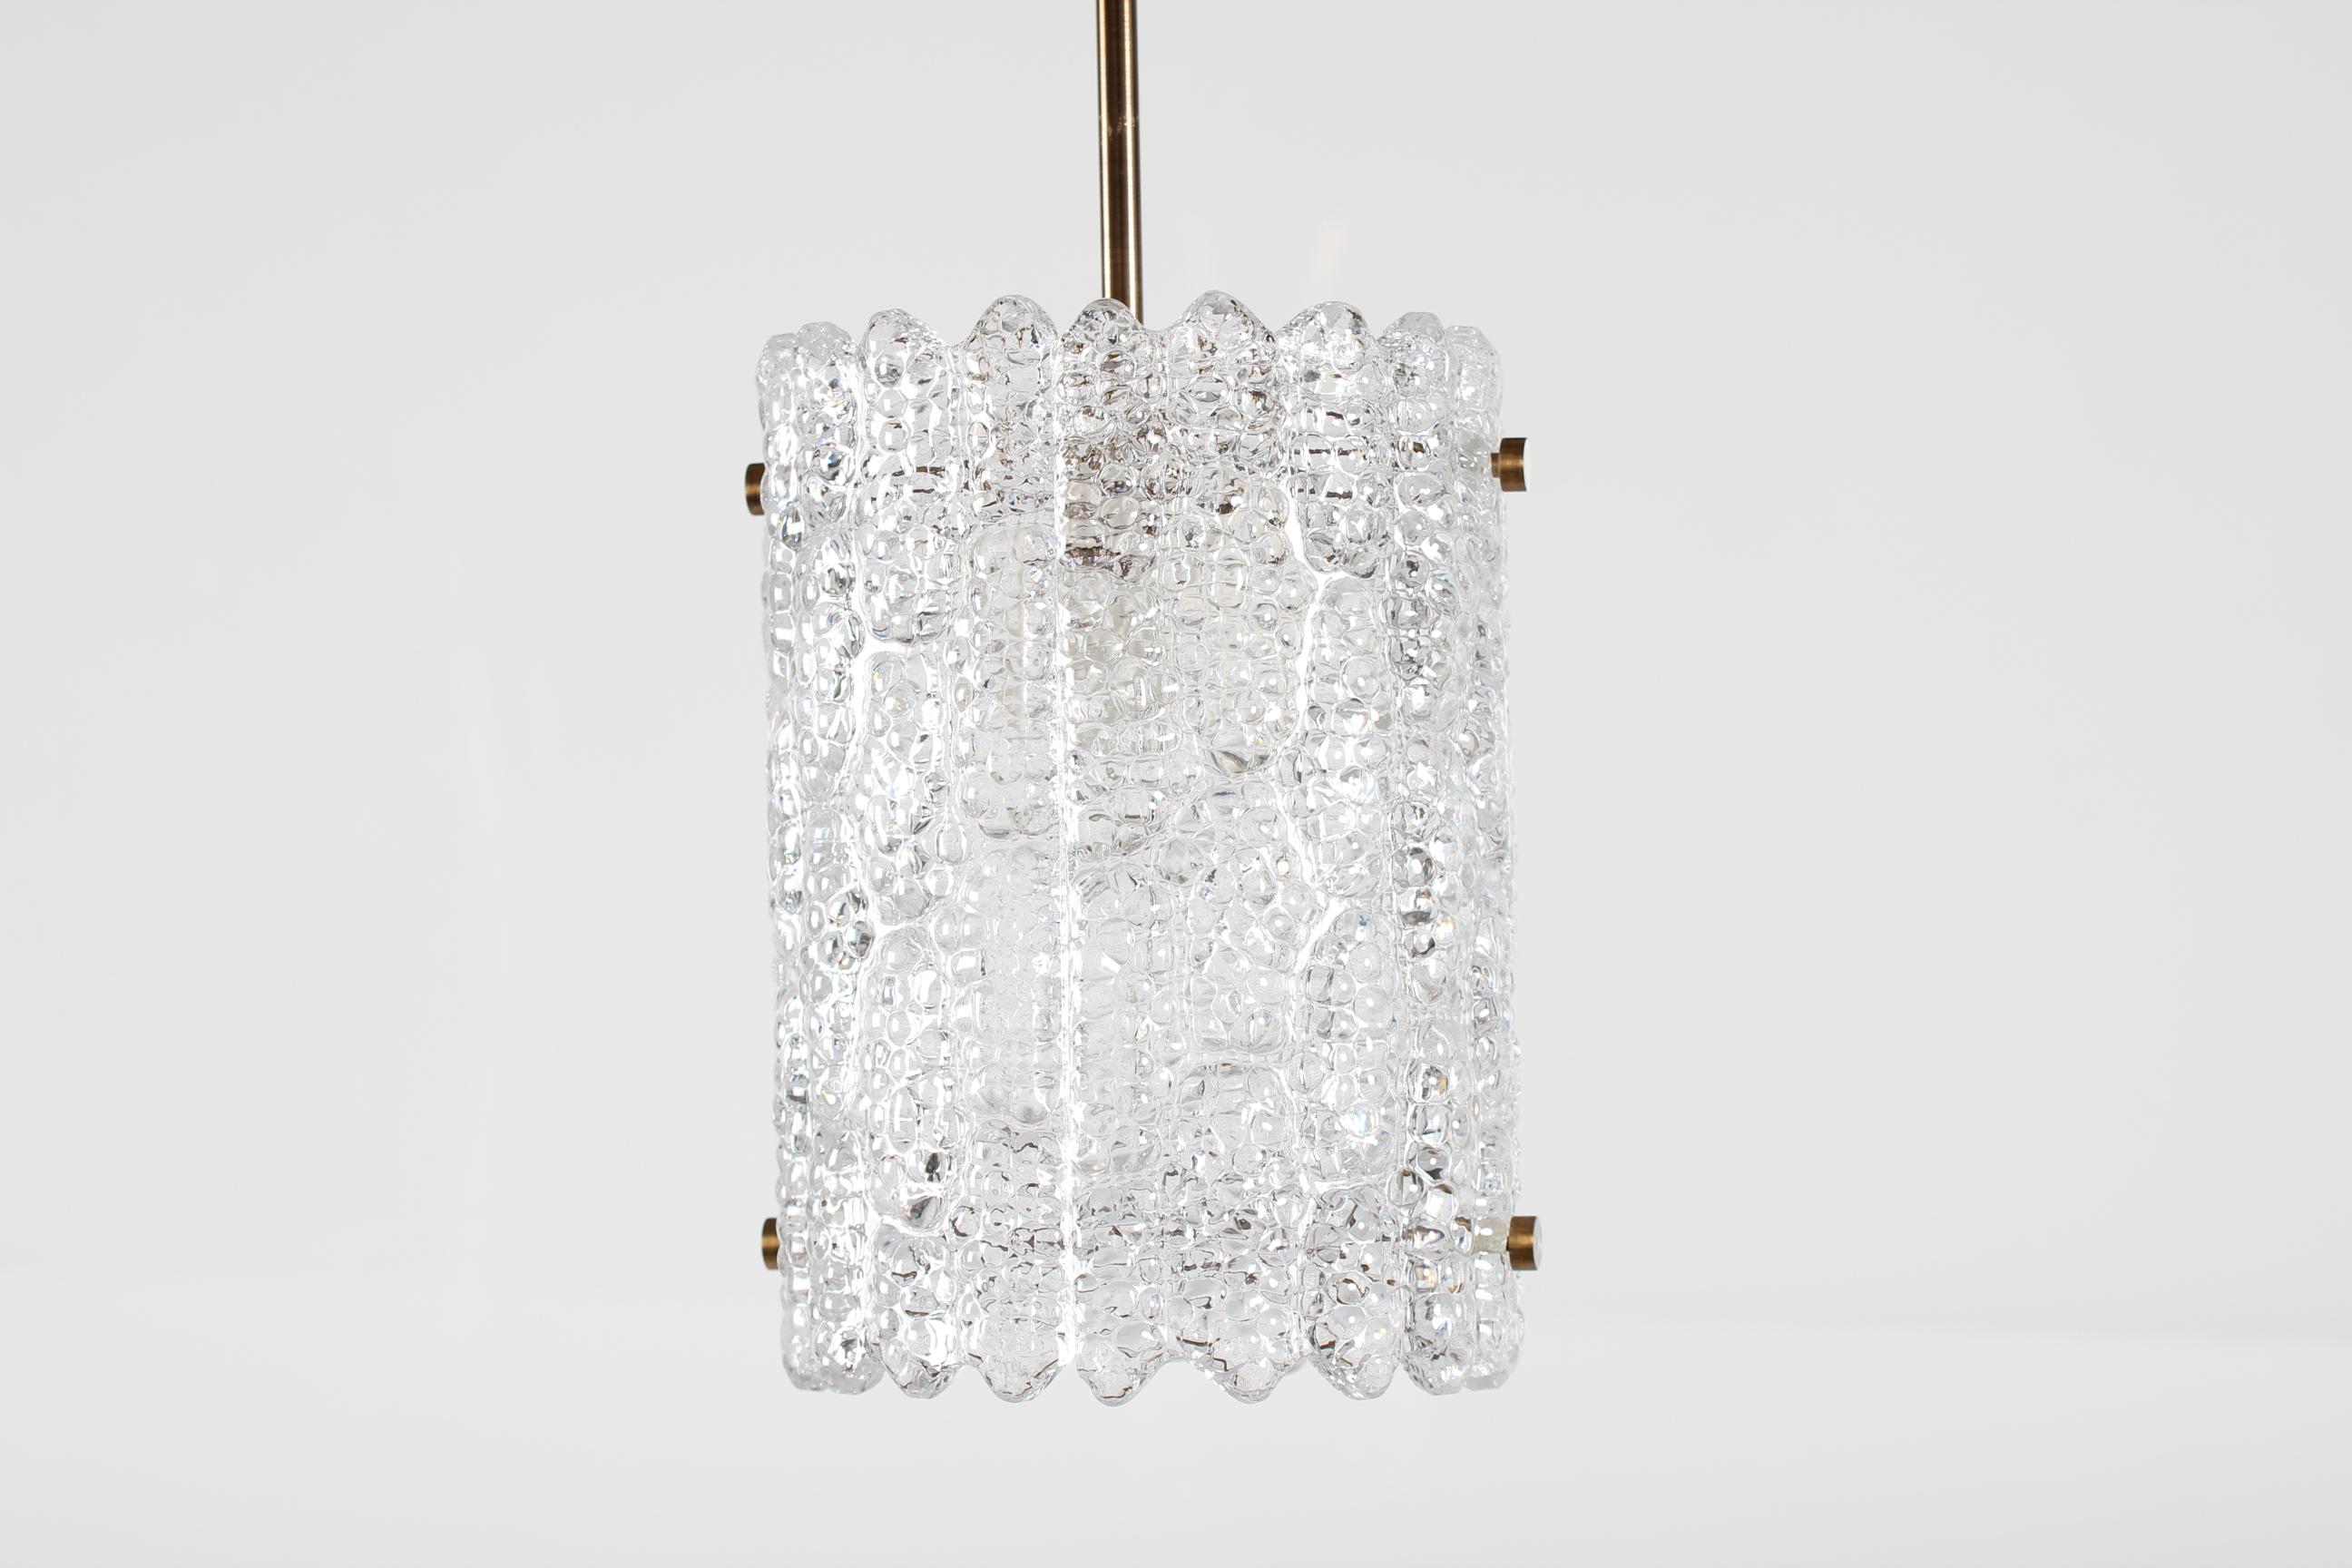 This pendant lamp by Swedish designer Carl Fagerlund for Orrefors was produced in the 1960s. The piece is made of heavy crystal glass and brass. The lamp requires an E27 bulb with a maximum of 60 W and remains fully functional.

Measures: Height